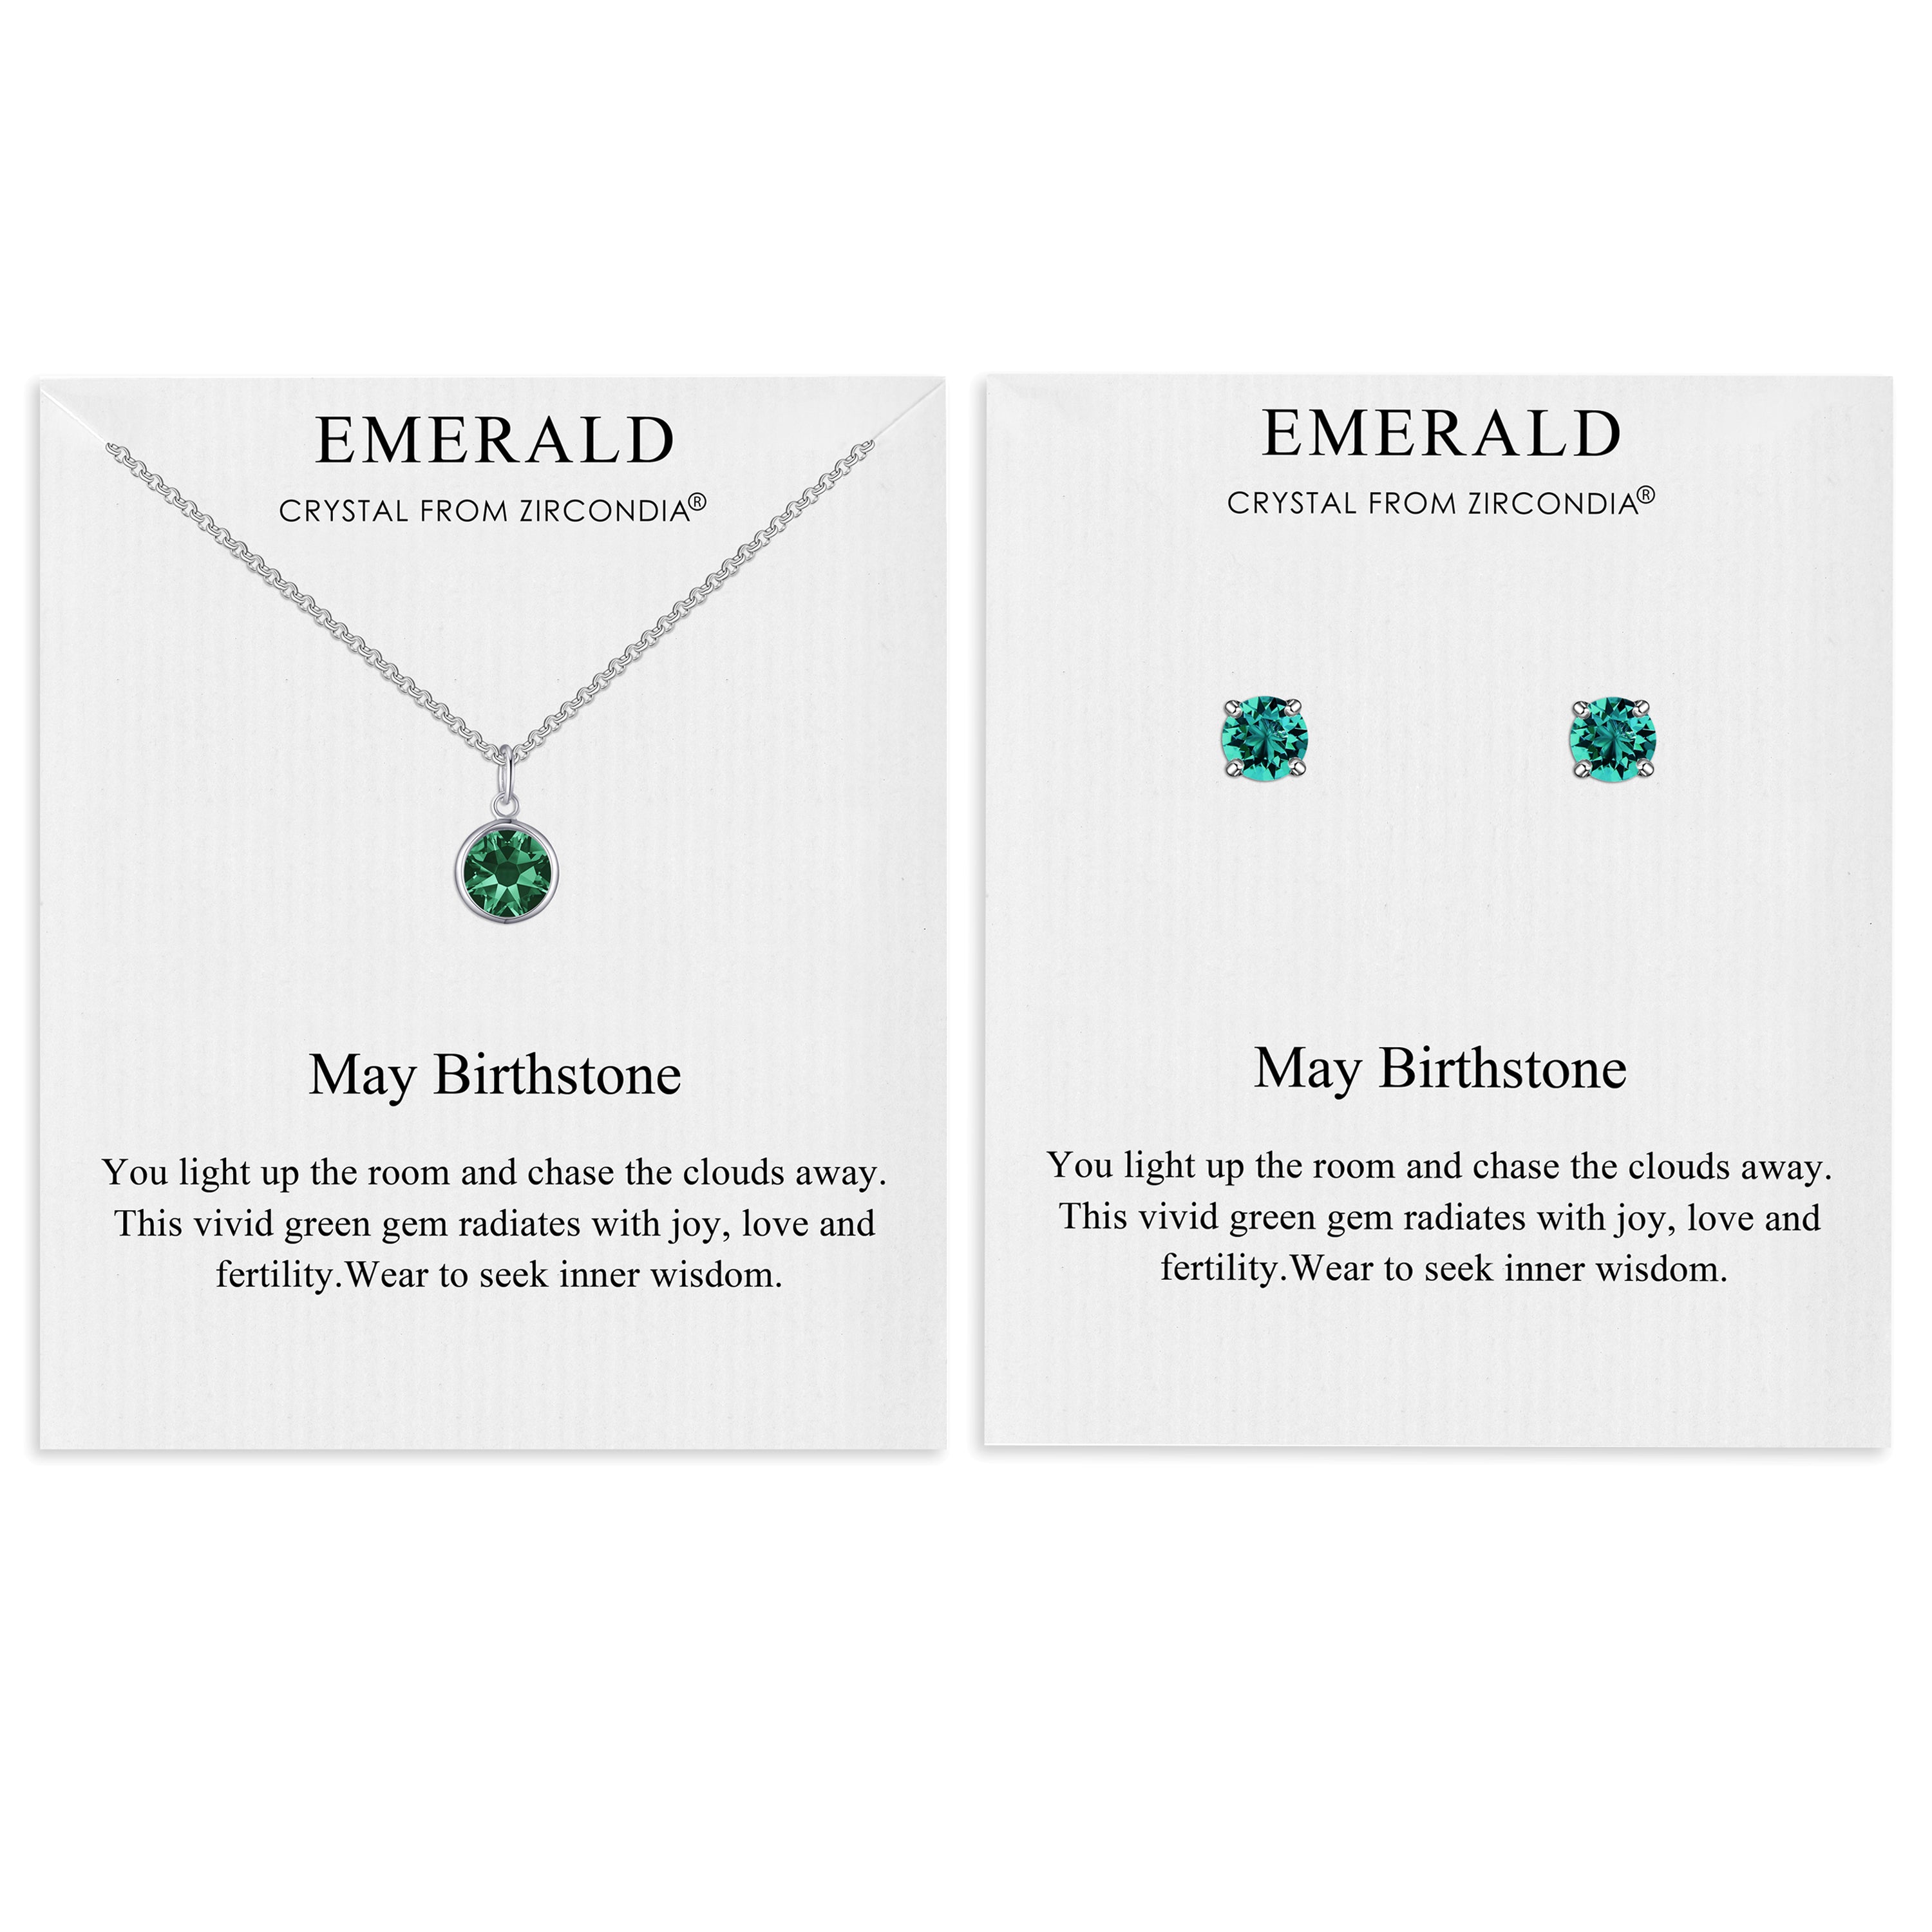 May (Emerald) Birthstone Necklace & Earrings Set Created with Zircondia® Crystals by Philip Jones Jewellery